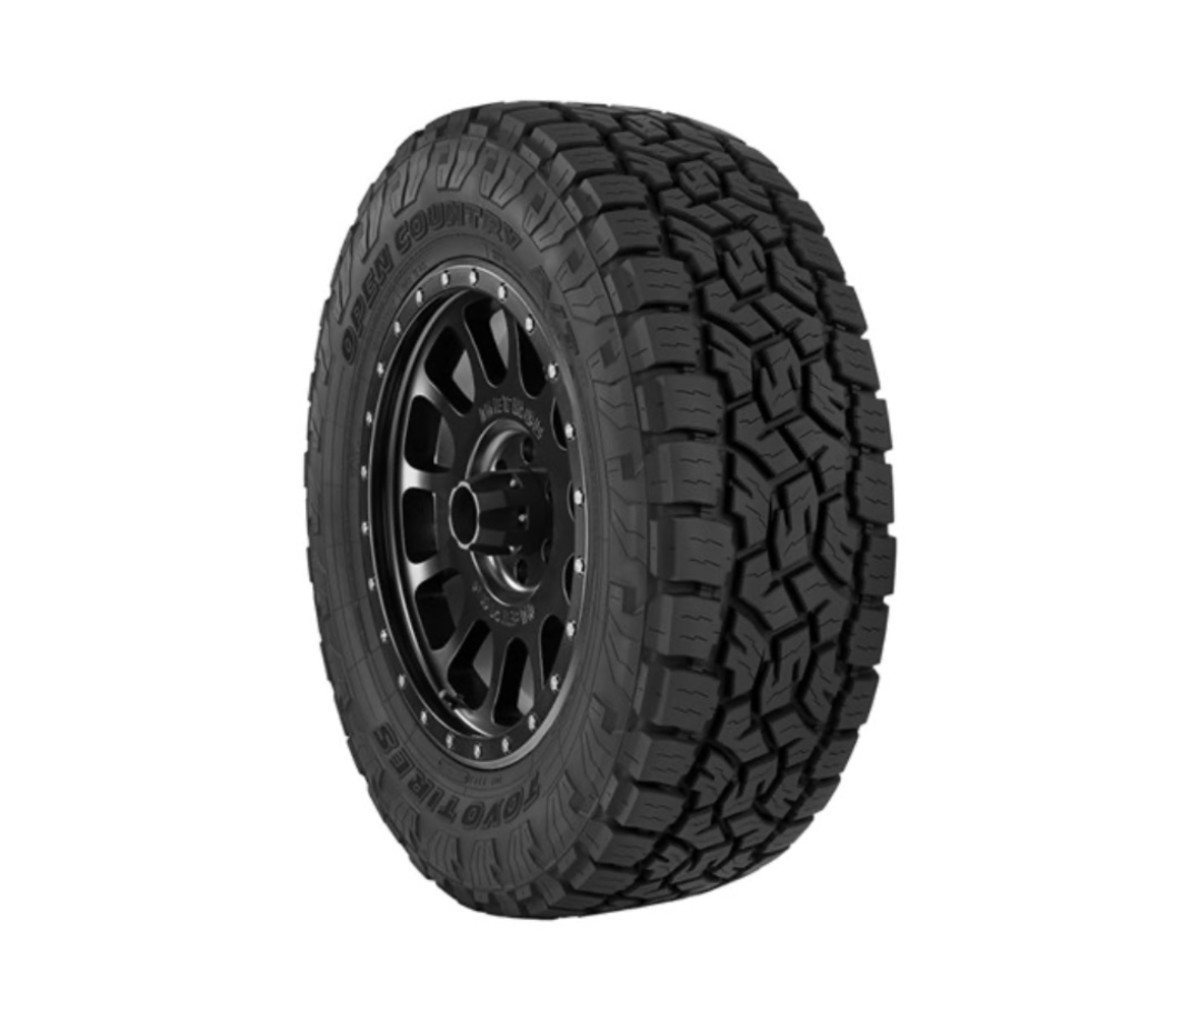 Upgrade to a Toyo All-Terrain tire to make your truck an overlanding overachiever.